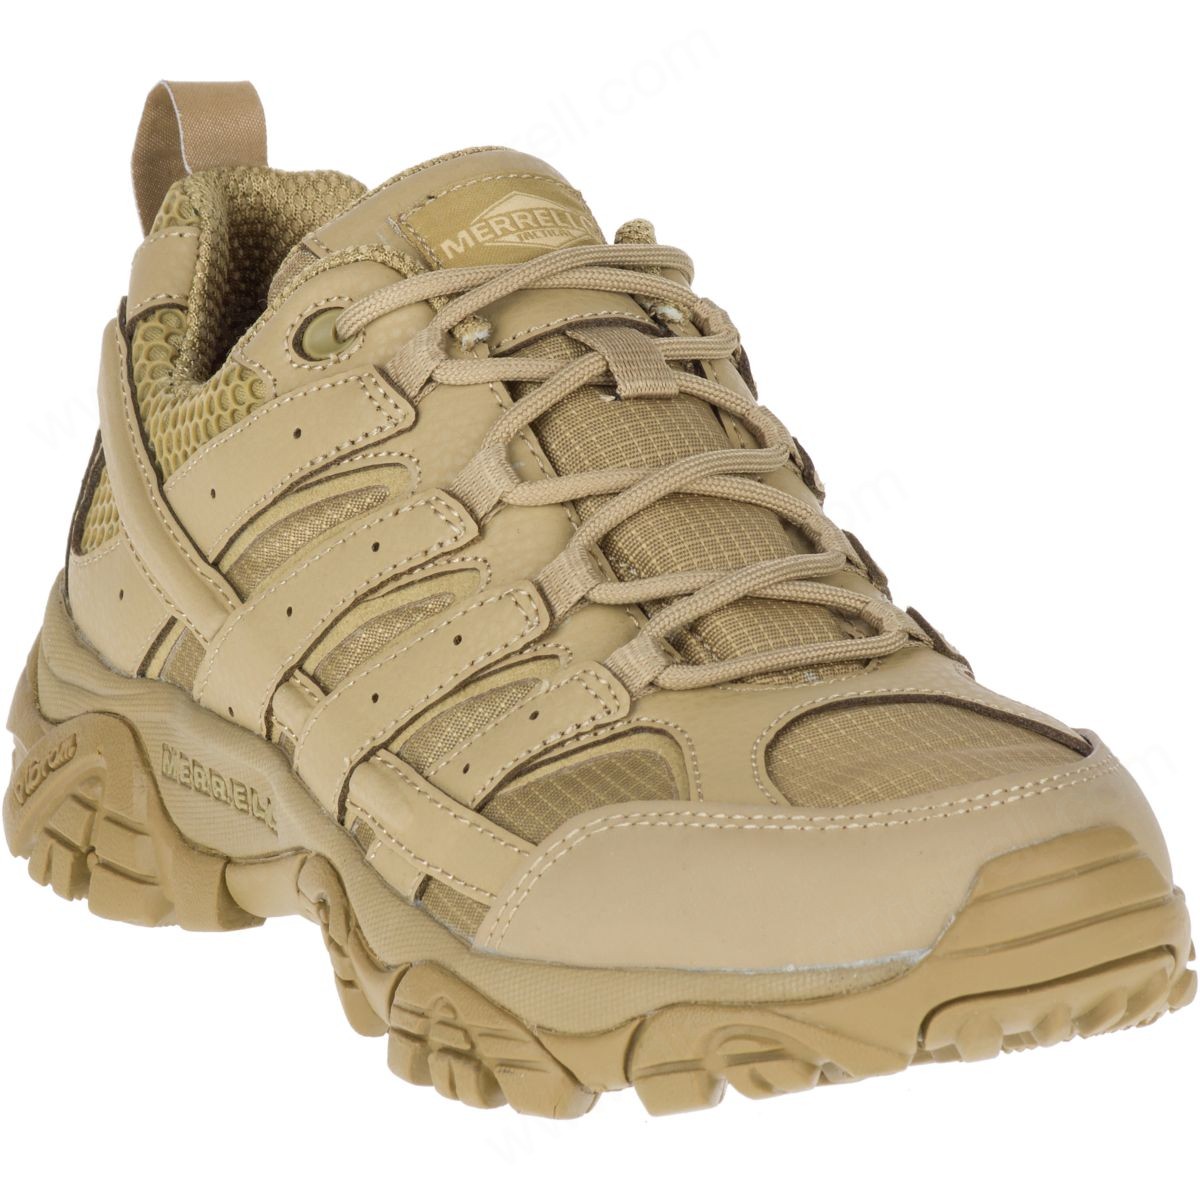 Merrell Woman's Moab Tactical Sneaker Coyote - -3